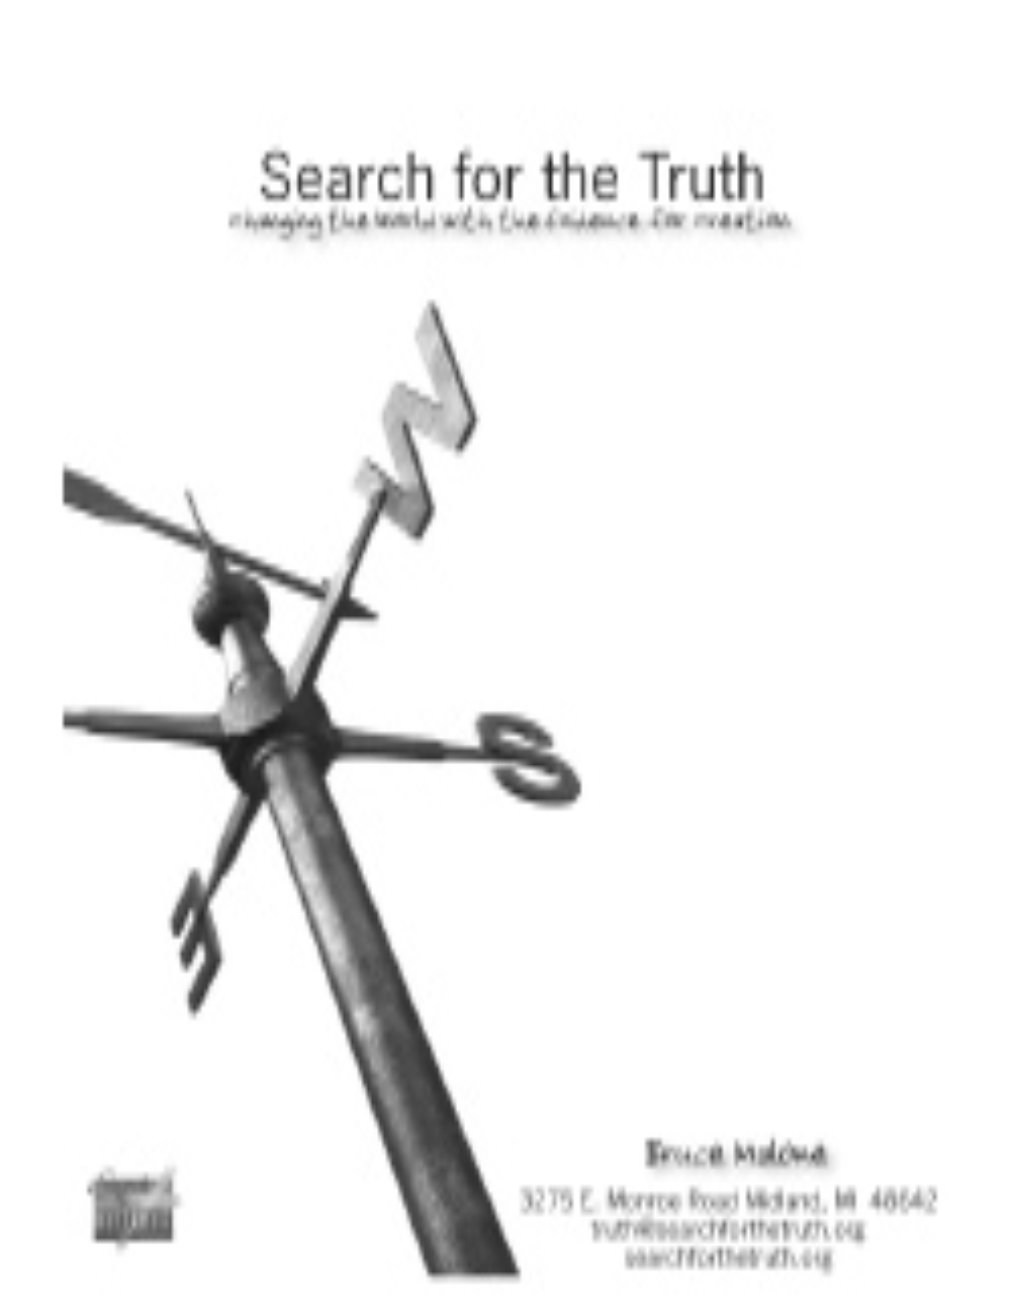 Search for the Truth ( Search for Short) Shares One Method of Tearing Down the Gates of Deceit That Grip Our World